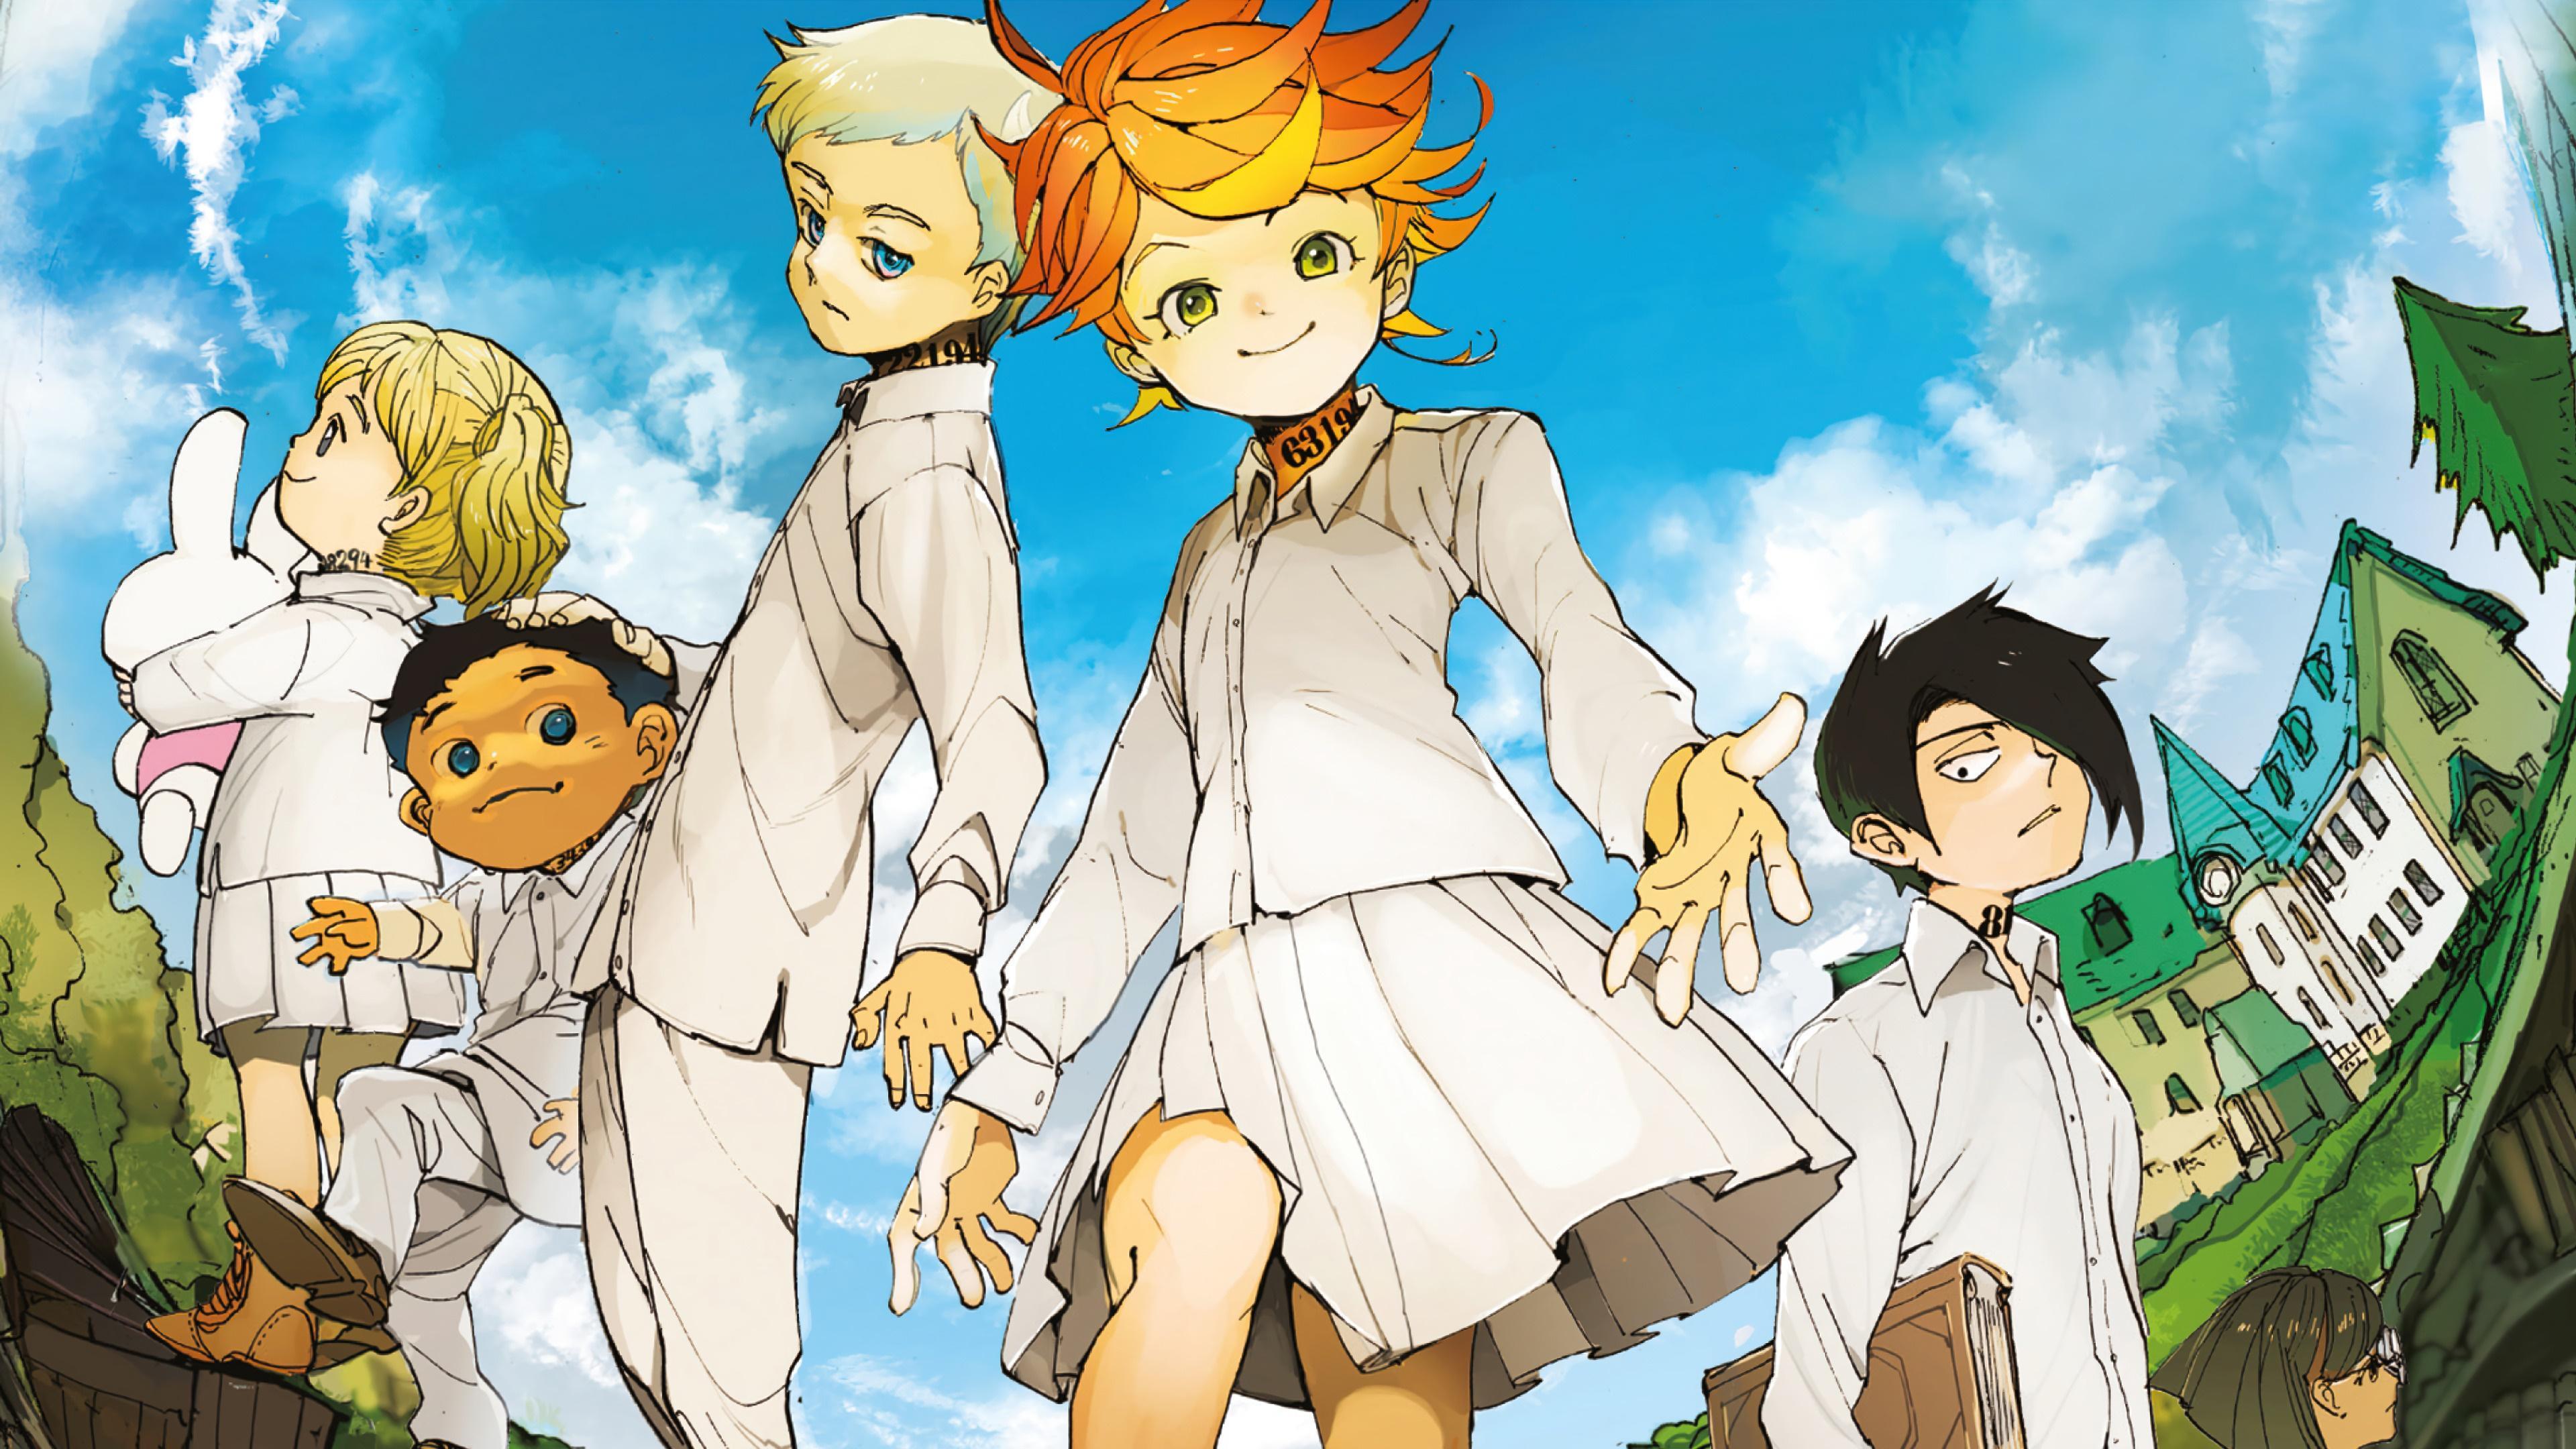 HD wallpaper, Ray, The Promised Neverland, Hd, 4K, Norman, Emma, Wallpaper